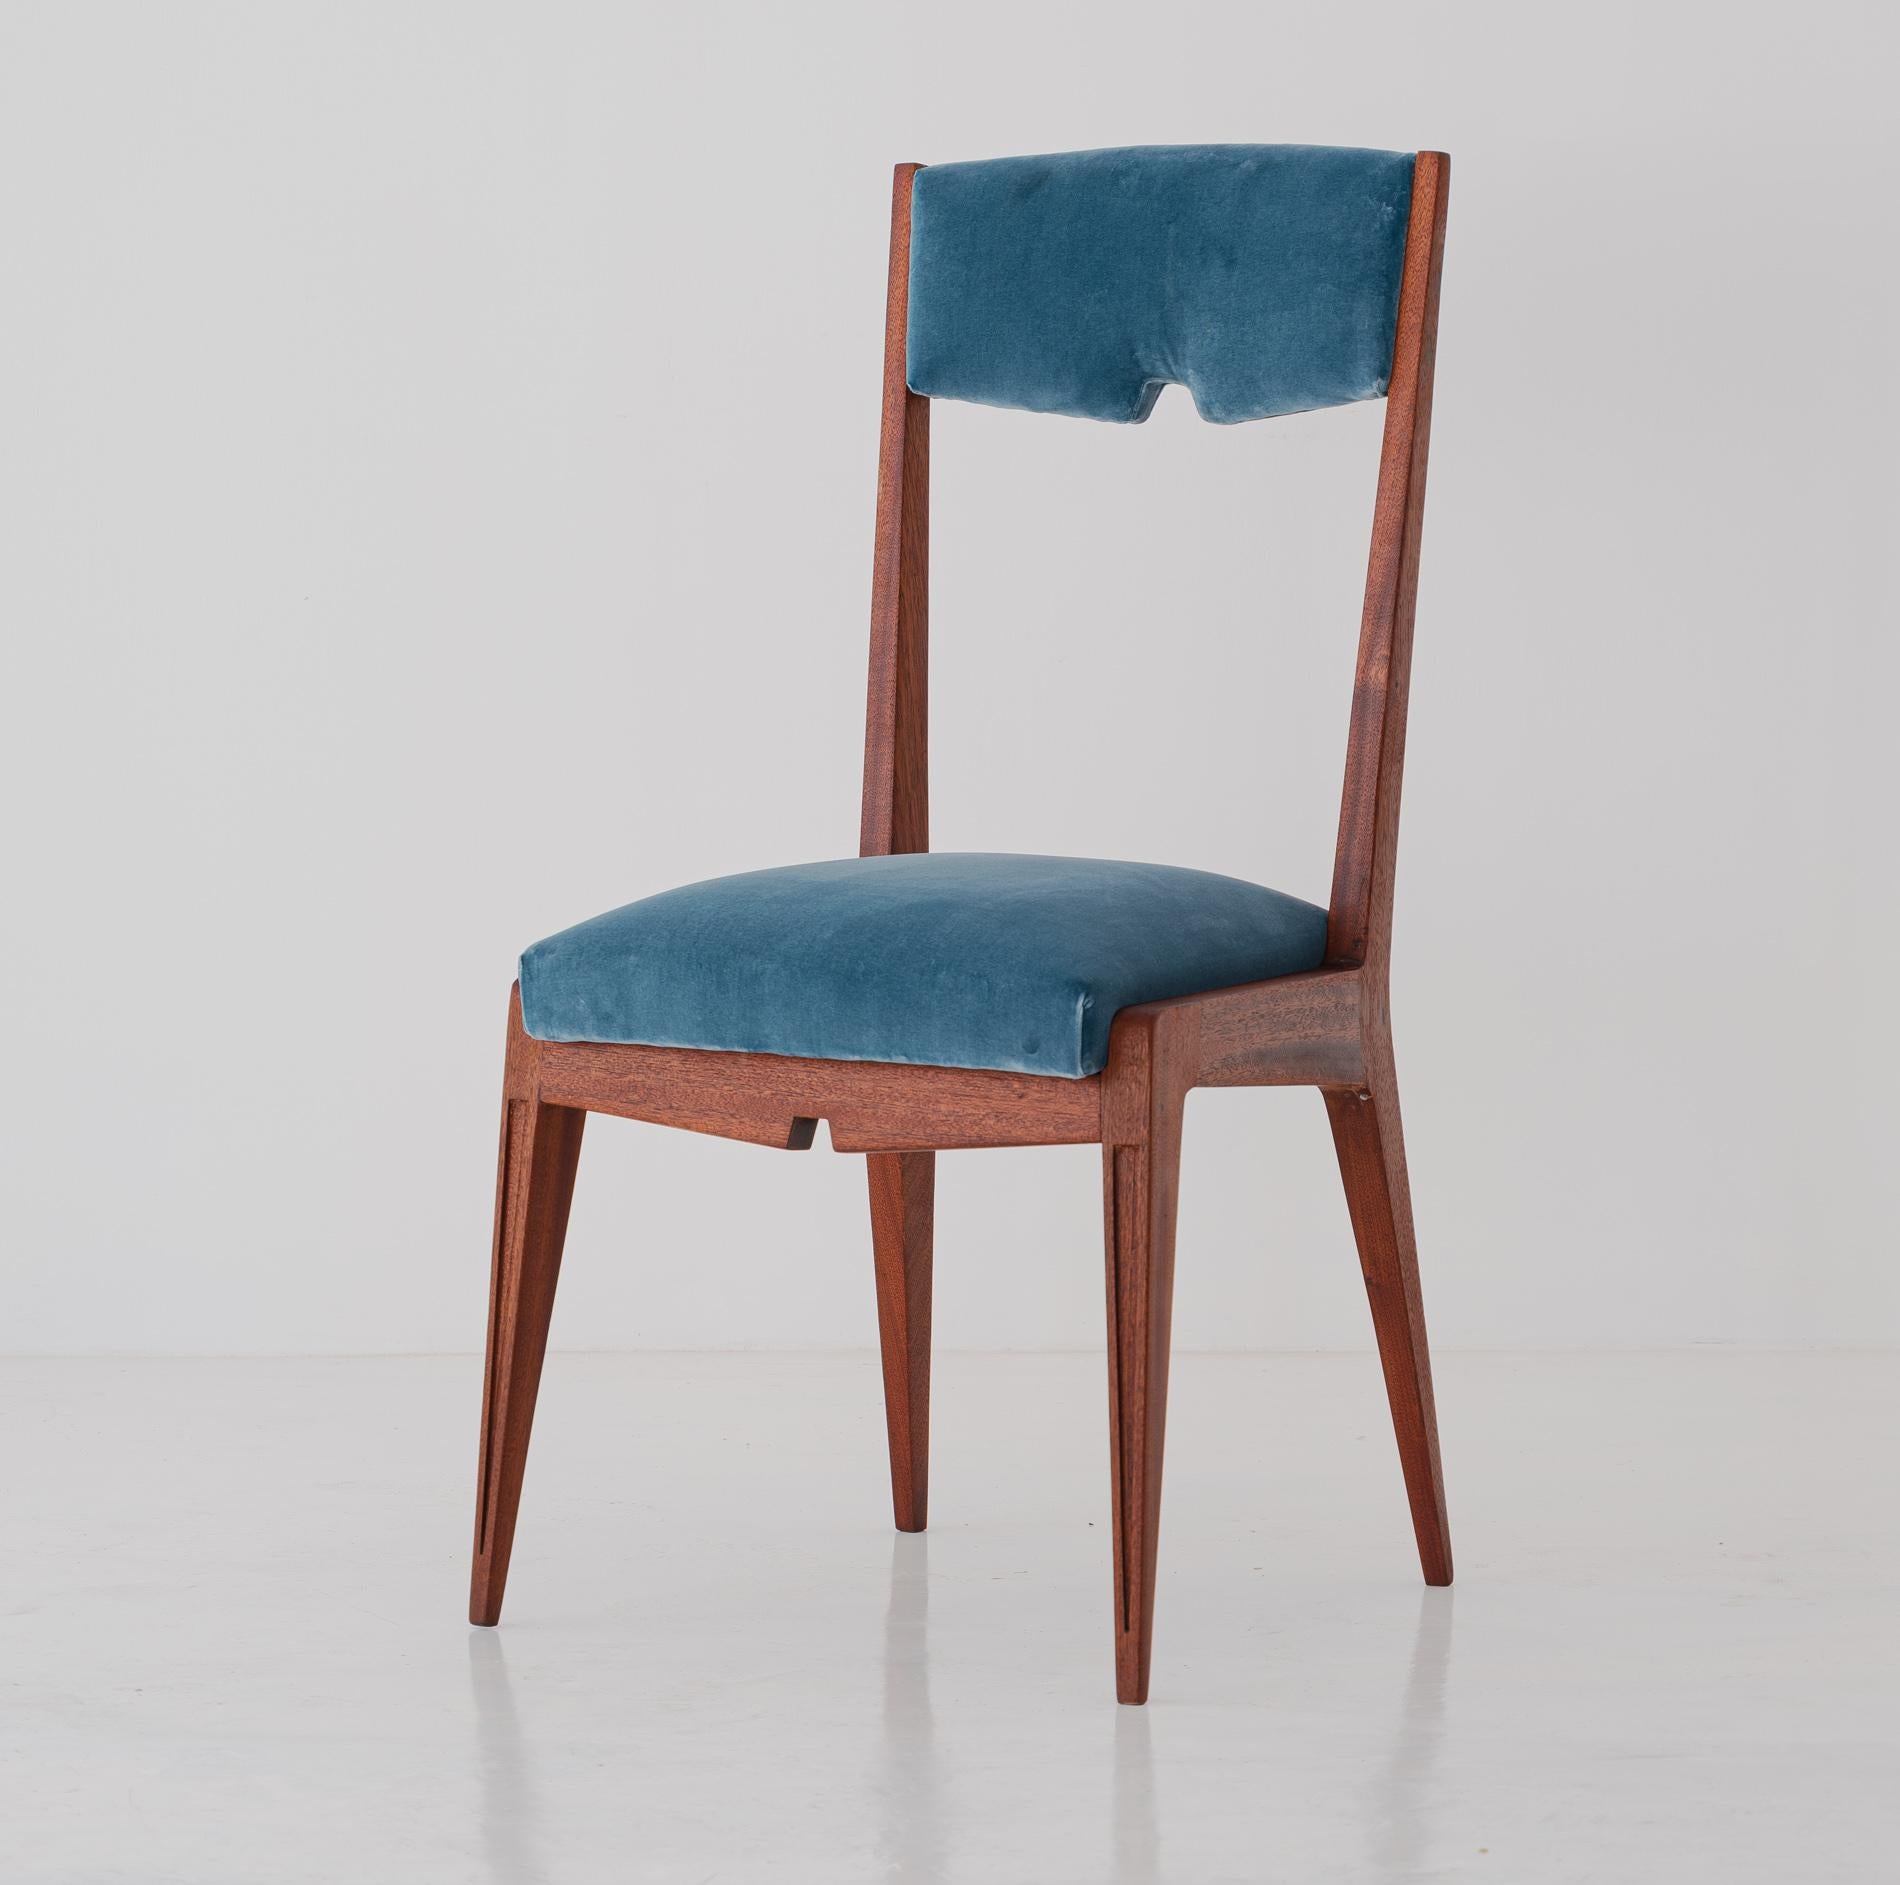 Set of four light blue velvet and mahogany dining chairs, manufactured in Italy during the 1950s


Completely restored:

The frame is made of solid and high quality mahogany wood, this is completely restored with a deep sanding, new gluing of all